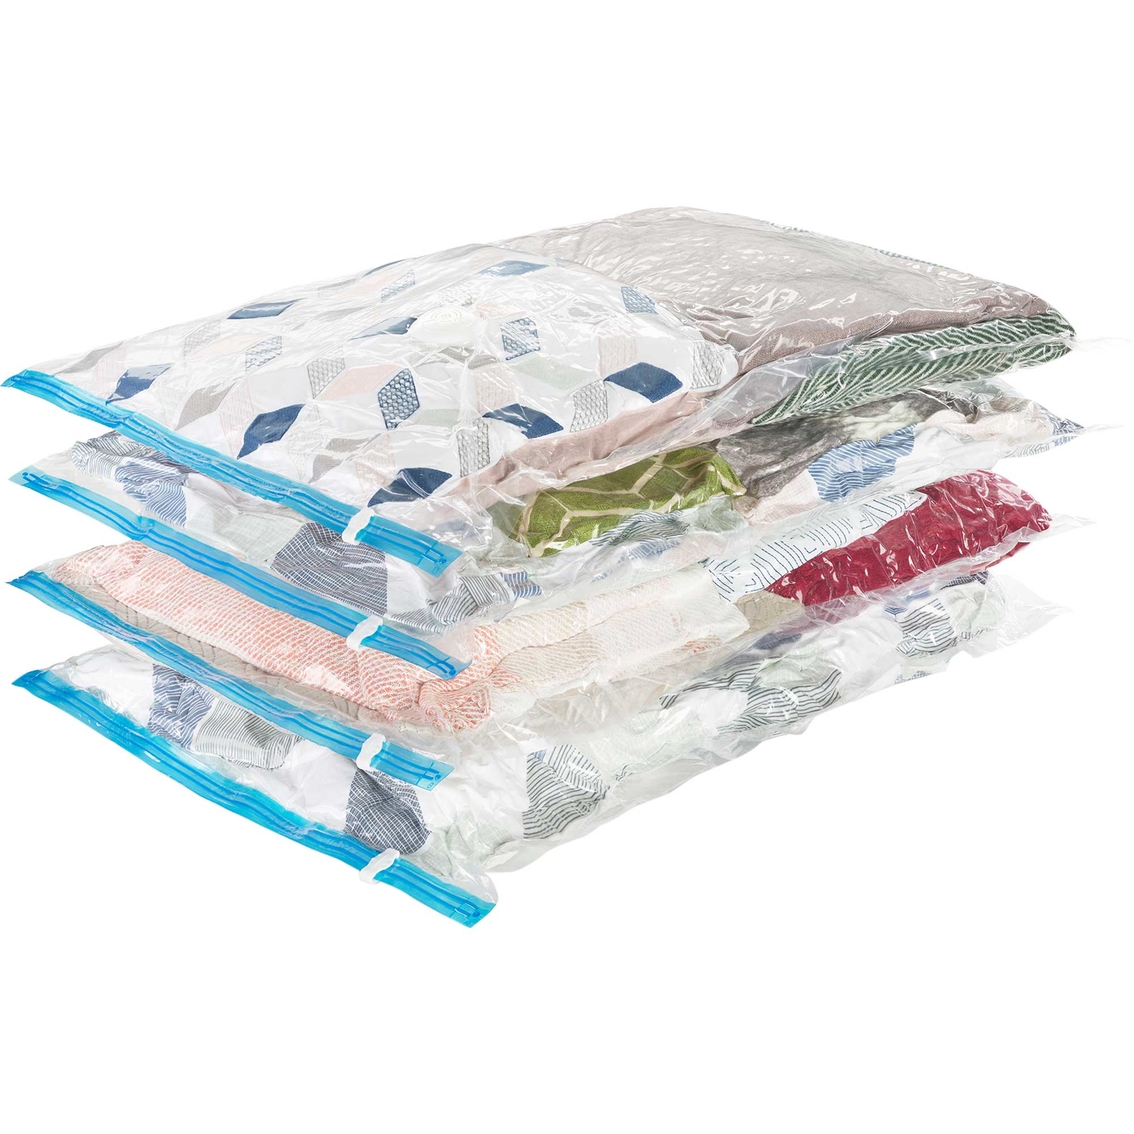 Whitmor Spacemaker Large Vacuum Bags 4 pc. Set - Image 2 of 3